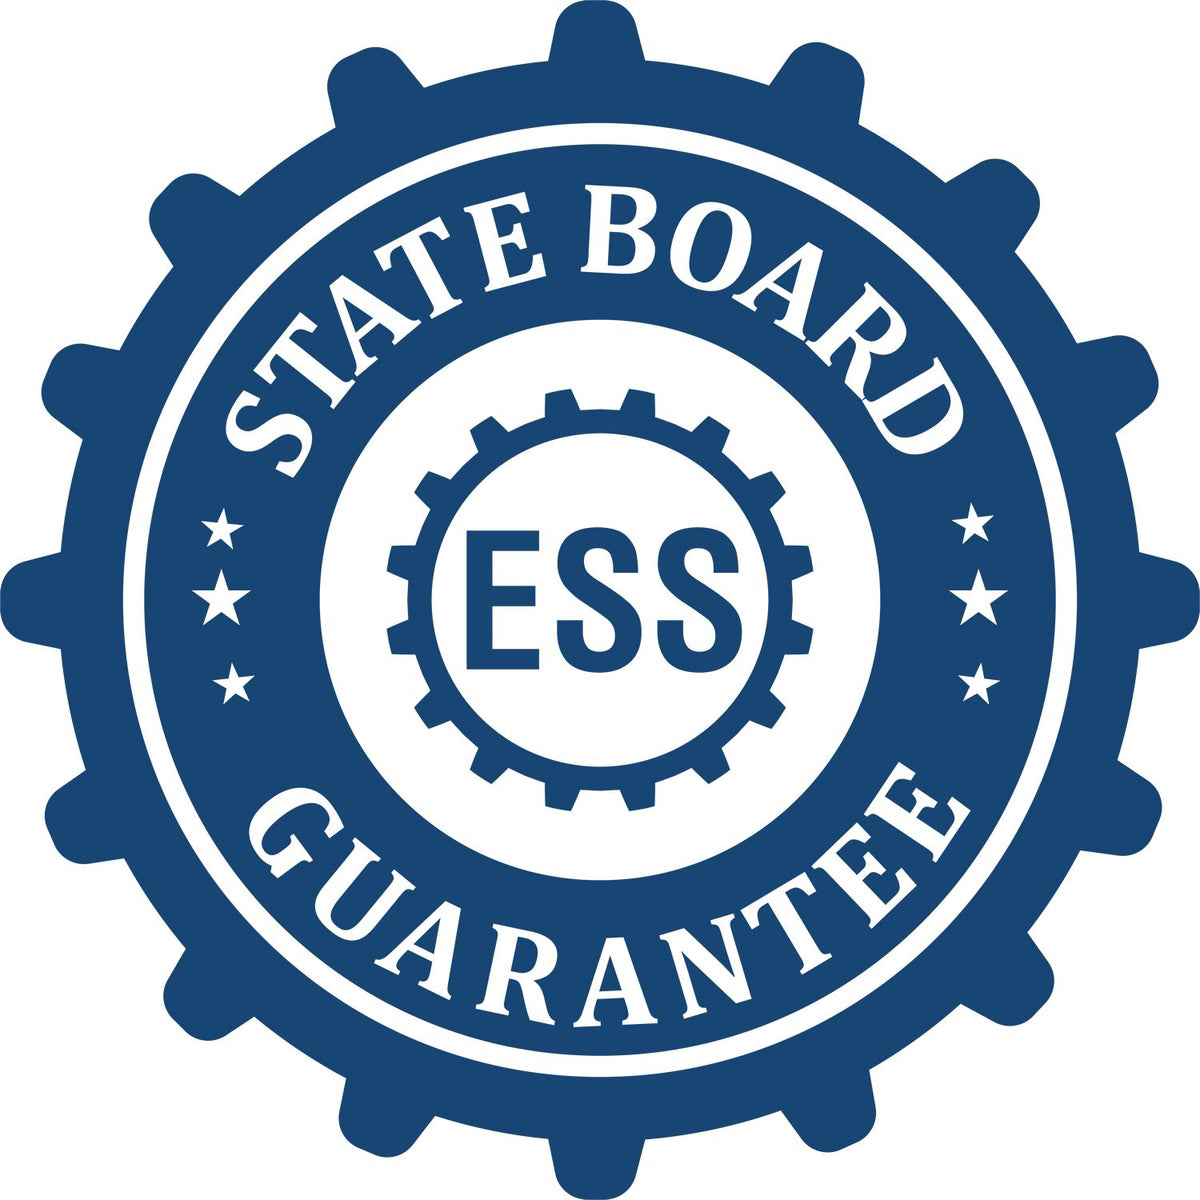 An emblem in a gear shape illustrating a state board guarantee for the Hybrid Maine Landscape Architect Seal